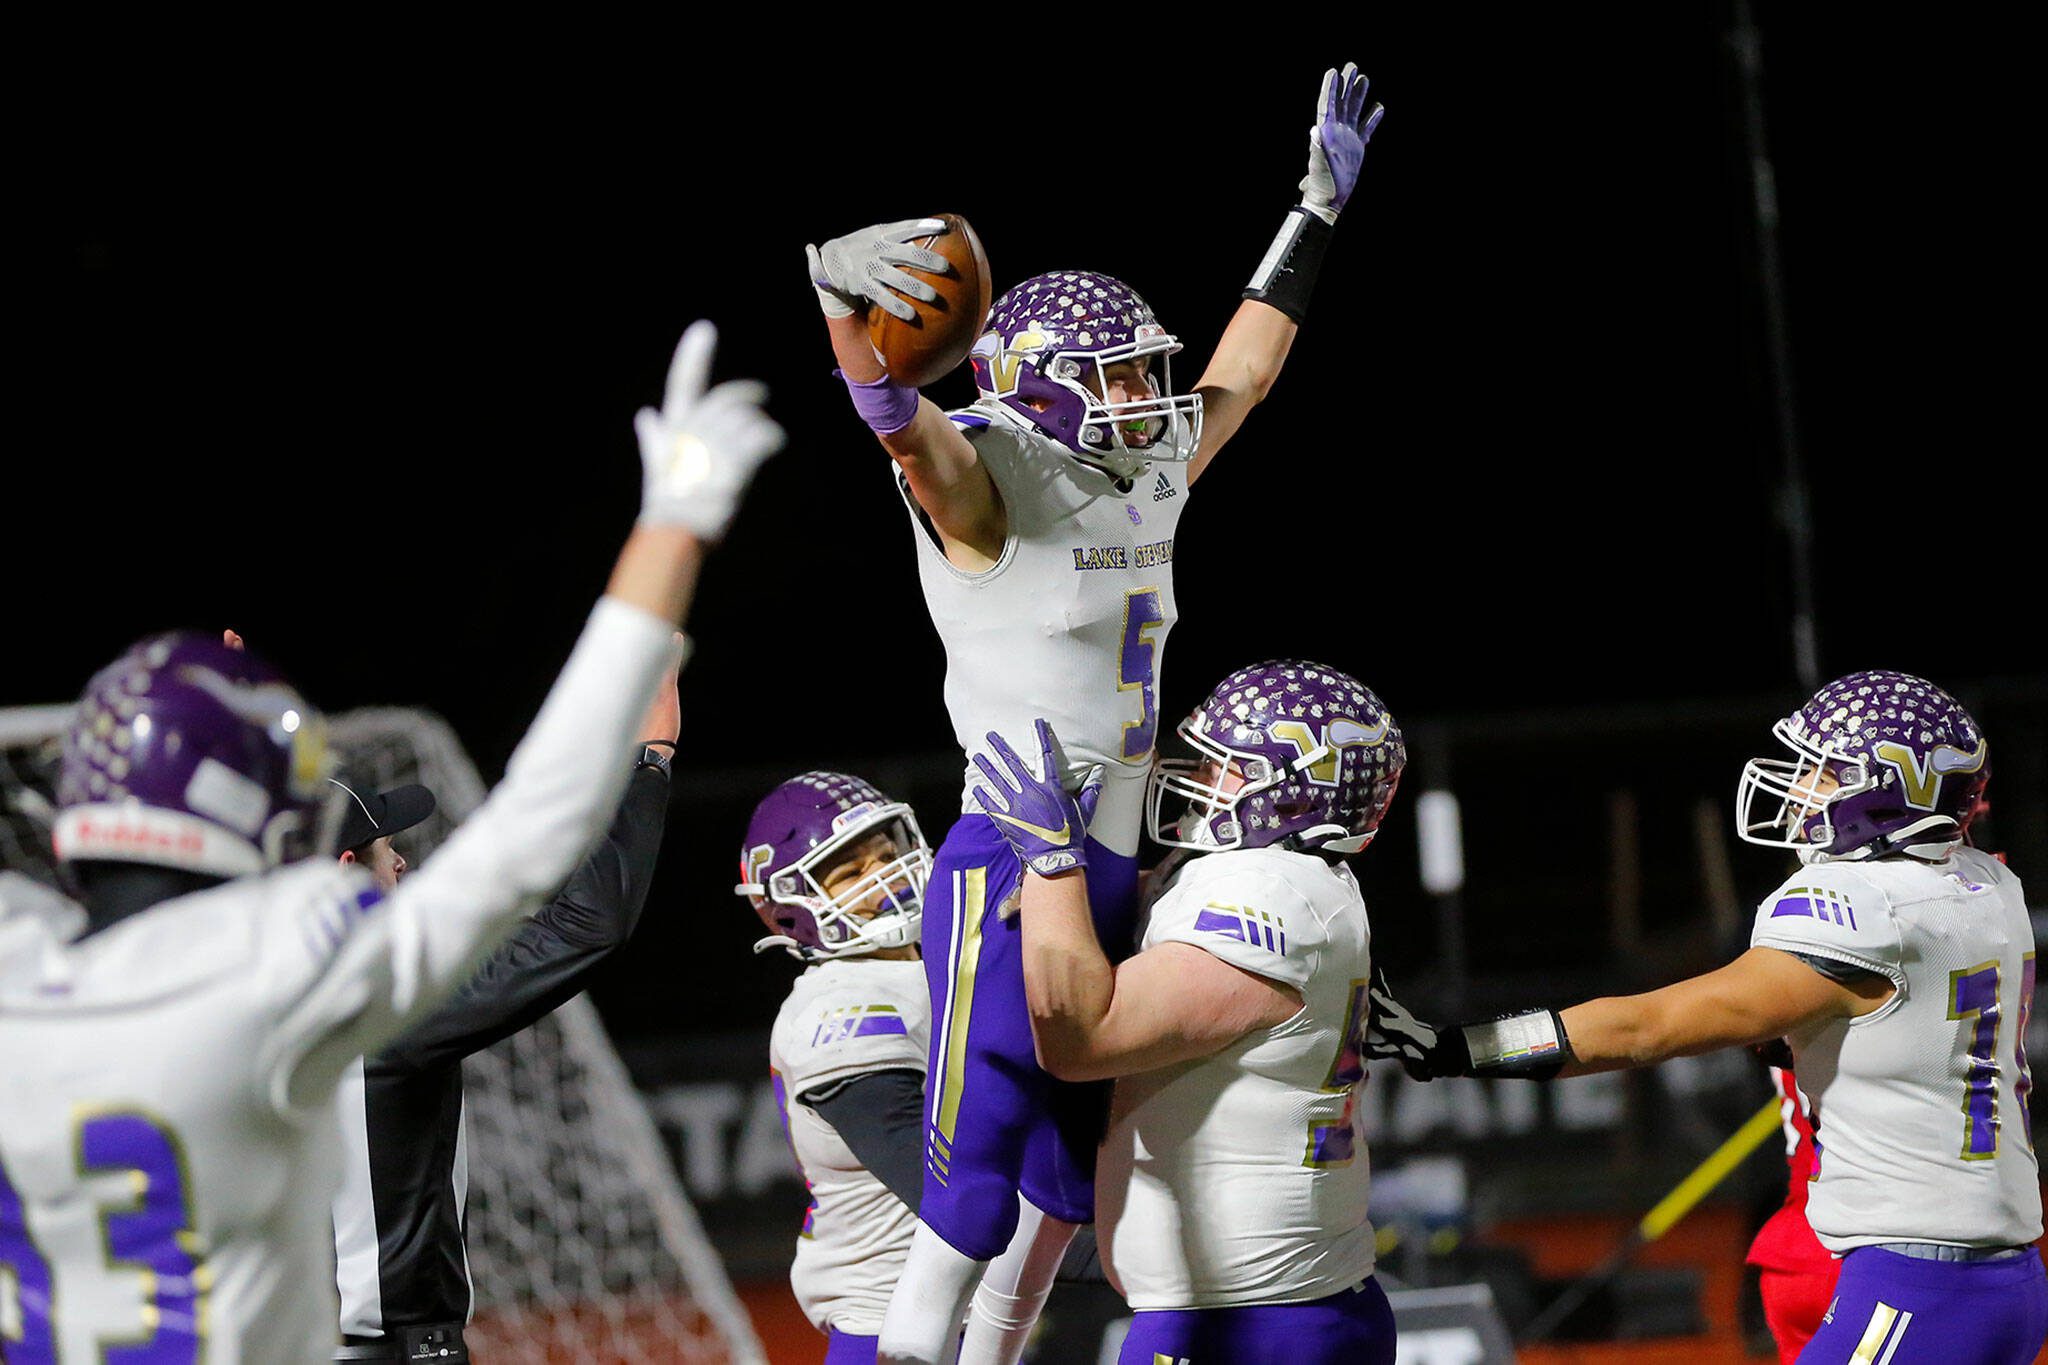 Lake Stevens’ Cole Becker celebrates a touchdown with teammates during the Class 4A state title game against Kennedy Catholic on Dec. 3, 2022, at Mount Tahoma Stadium in Tacoma. The Lake Stevens football team won the state championship. (Ryan Berry / The Herald)